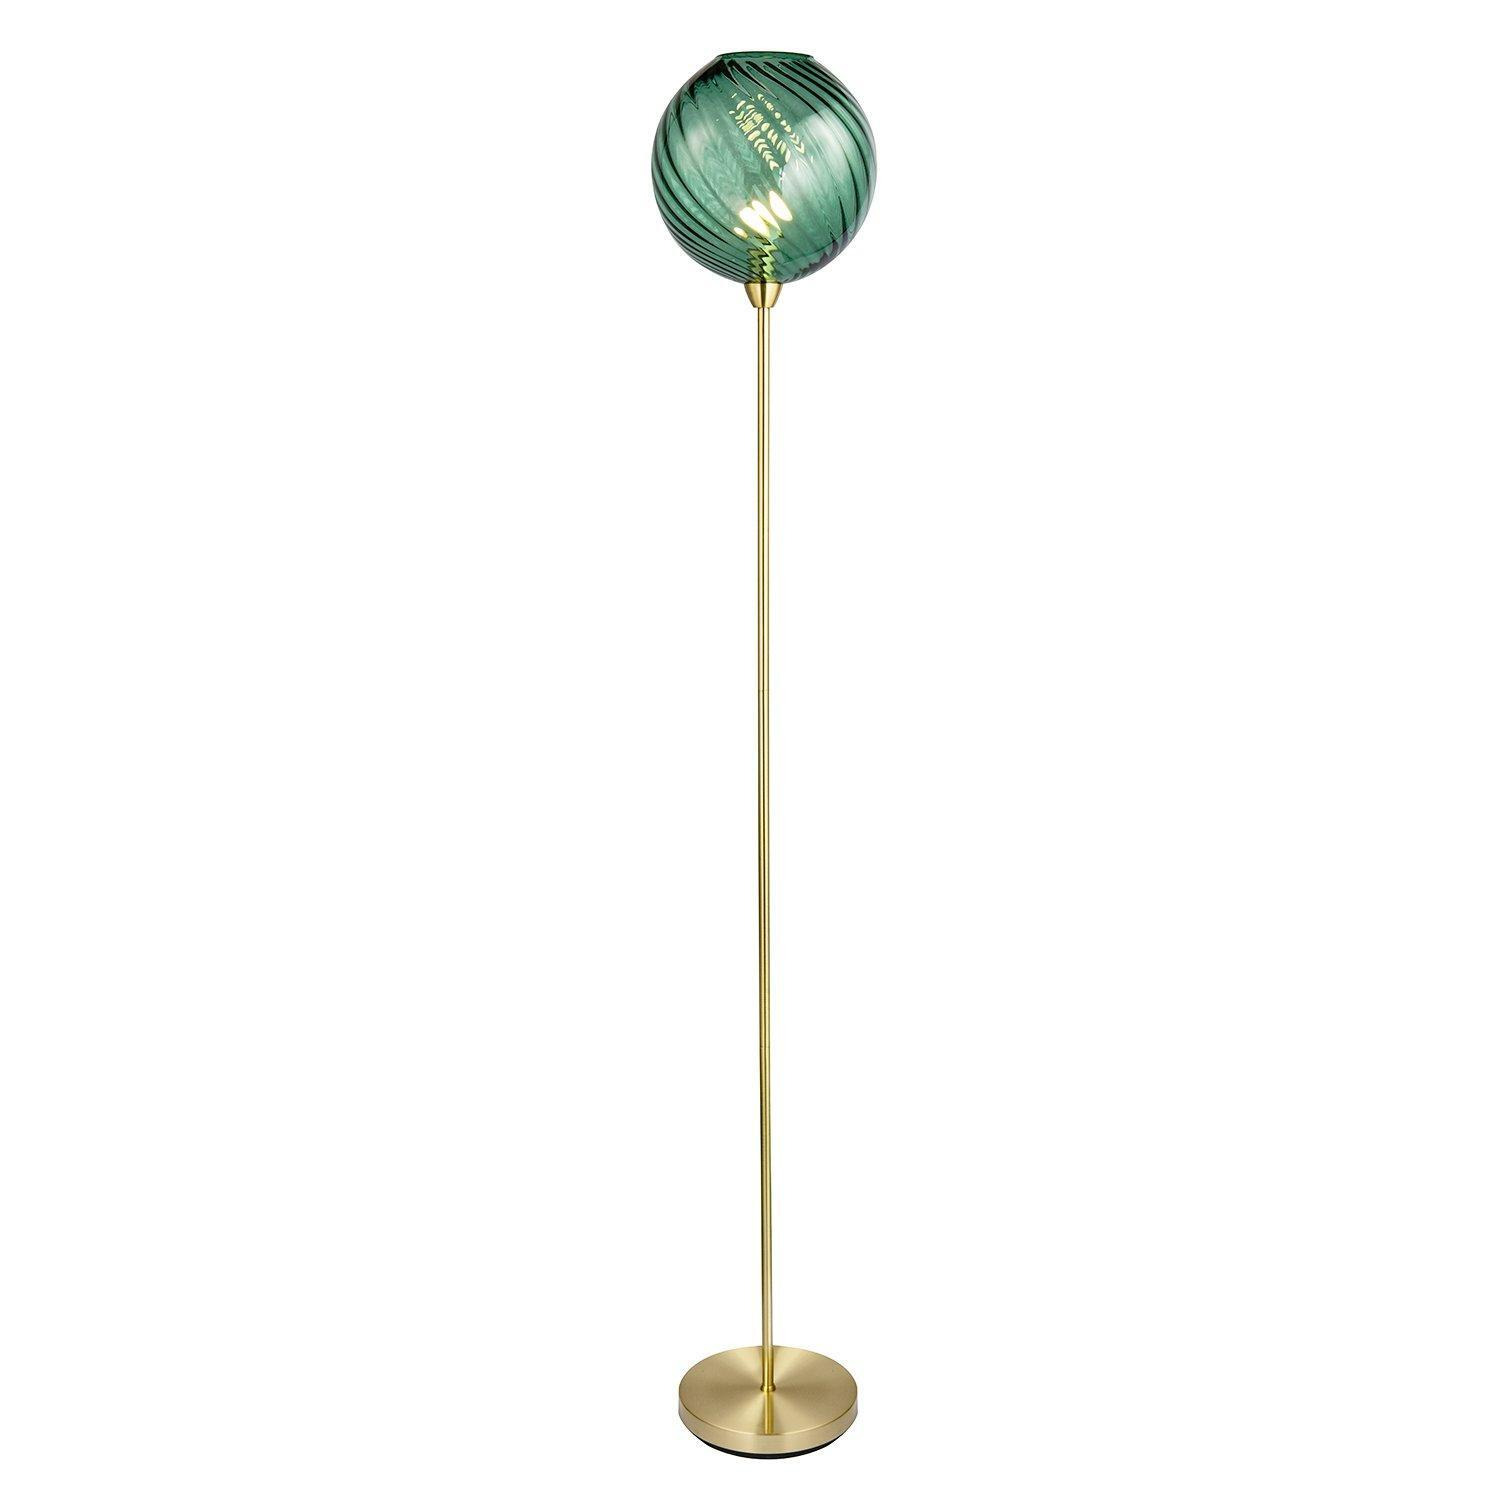 Designer Chic Floor Lamp with Brushed Metal Base and Glass Shade - image 1